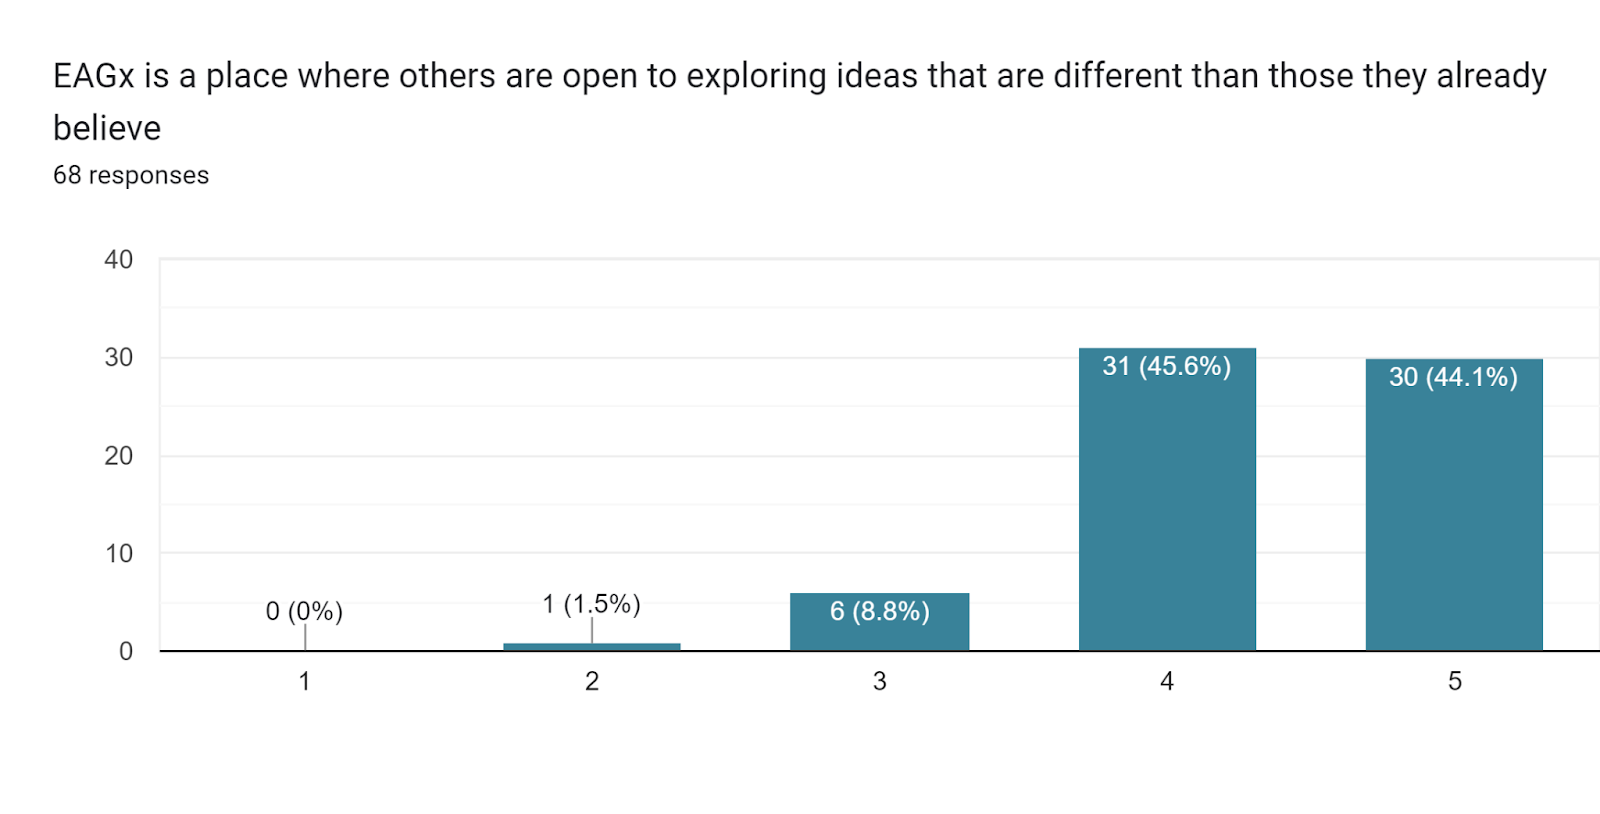 Forms response chart. Question title: EAGx is a place where others are open to exploring ideas that are different than those they already believe. Number of responses: 68 responses.